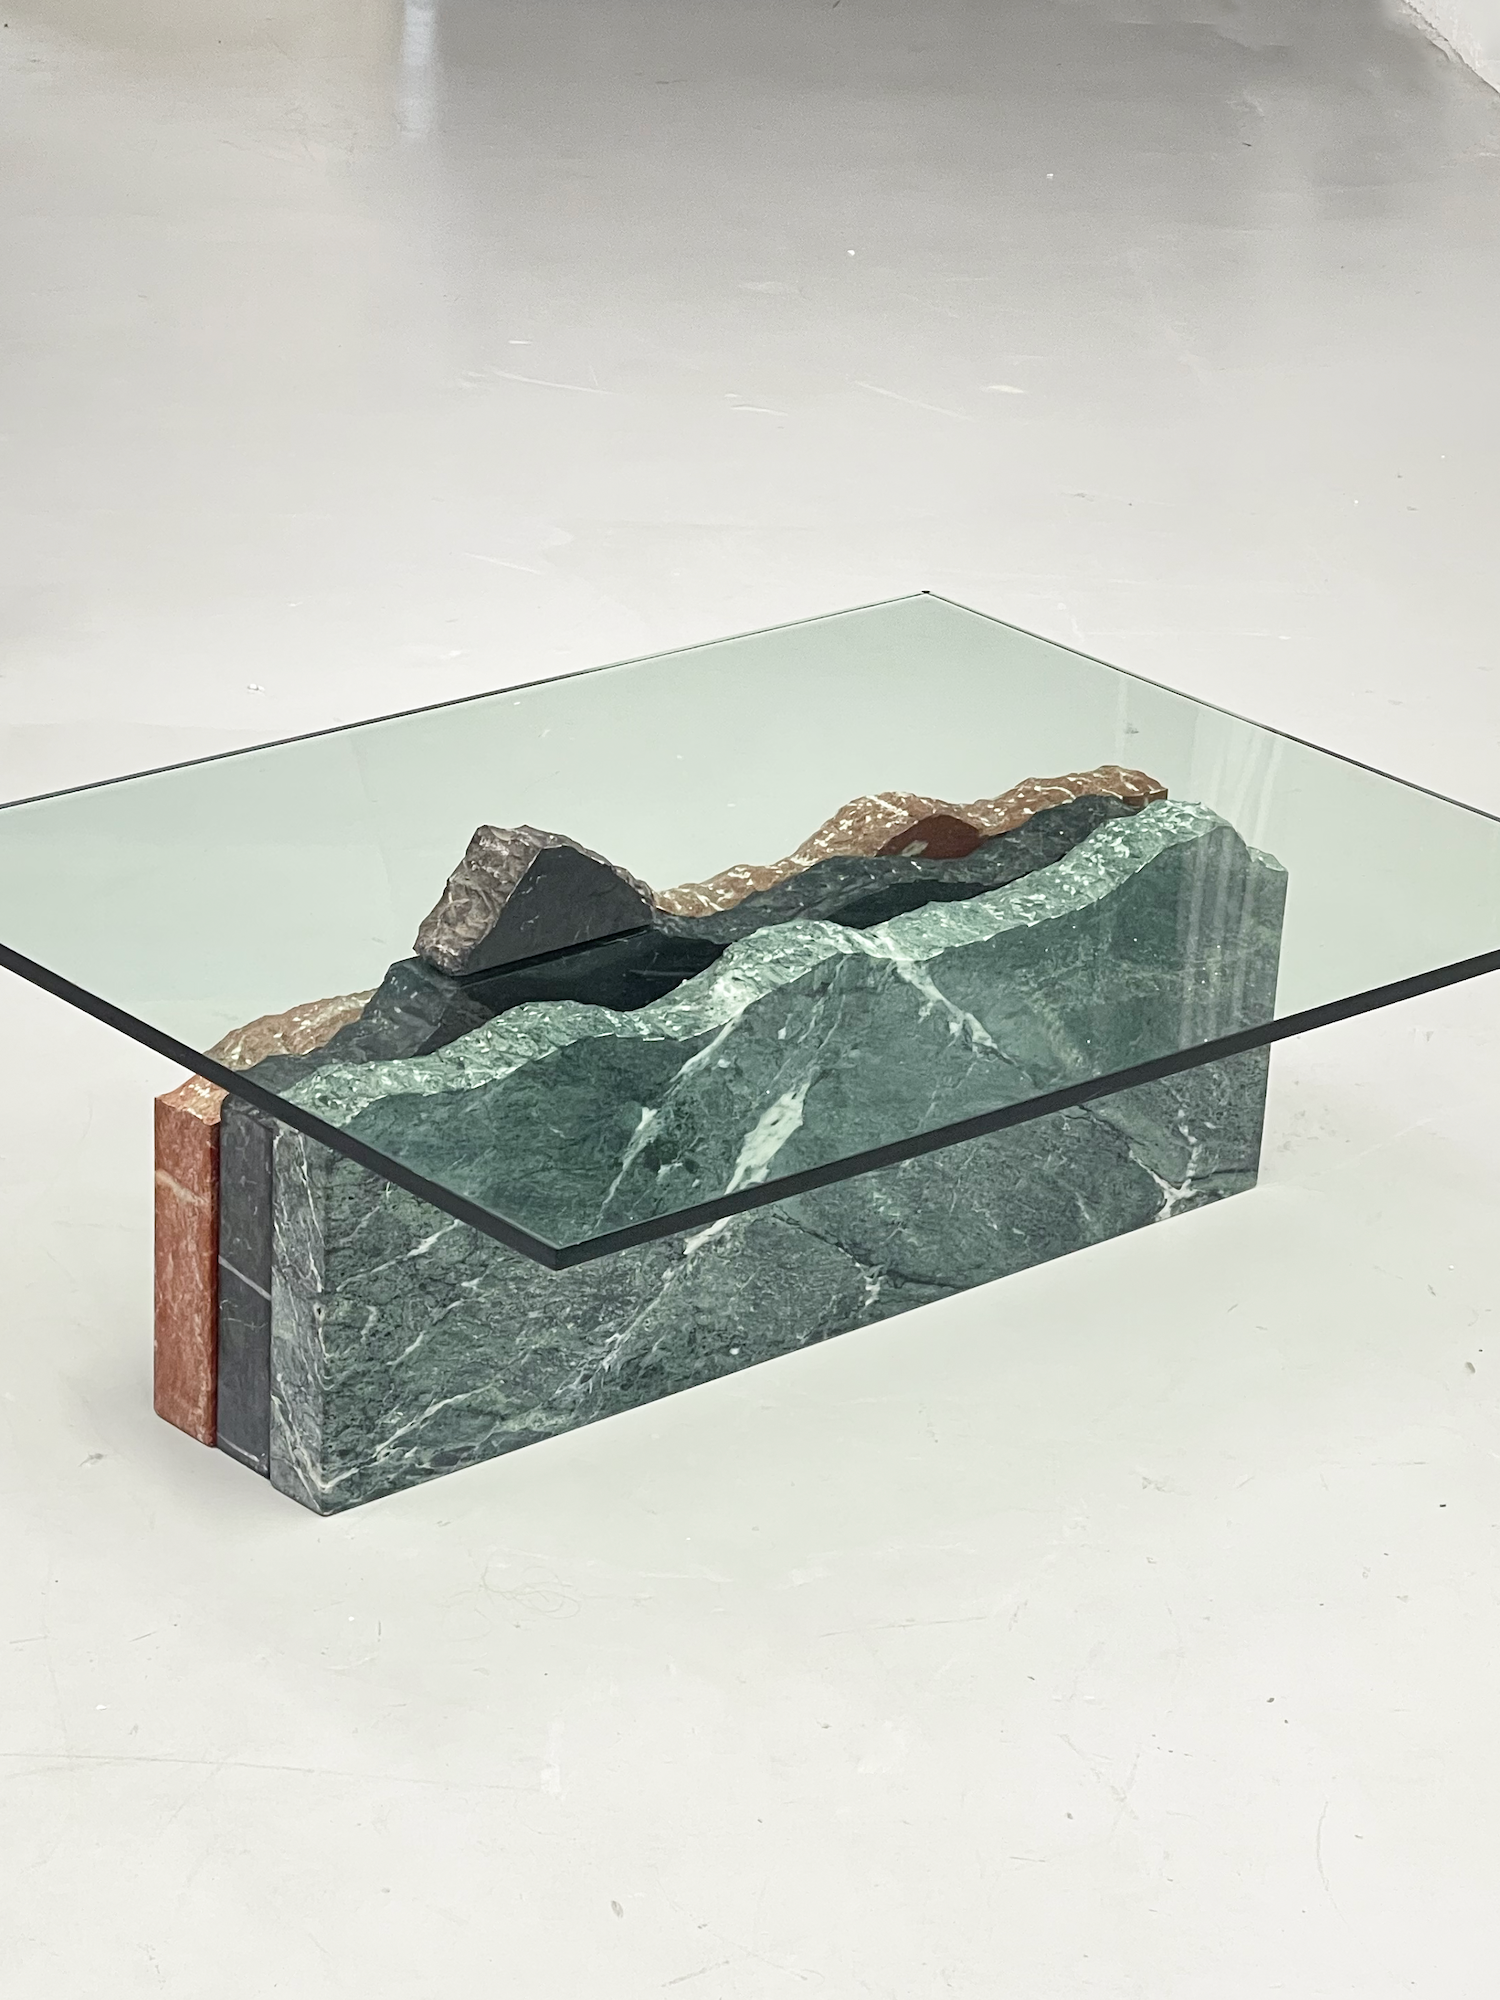 Rare 'Mountain Range' Coffee Table by SITE for Casigliani, 1989